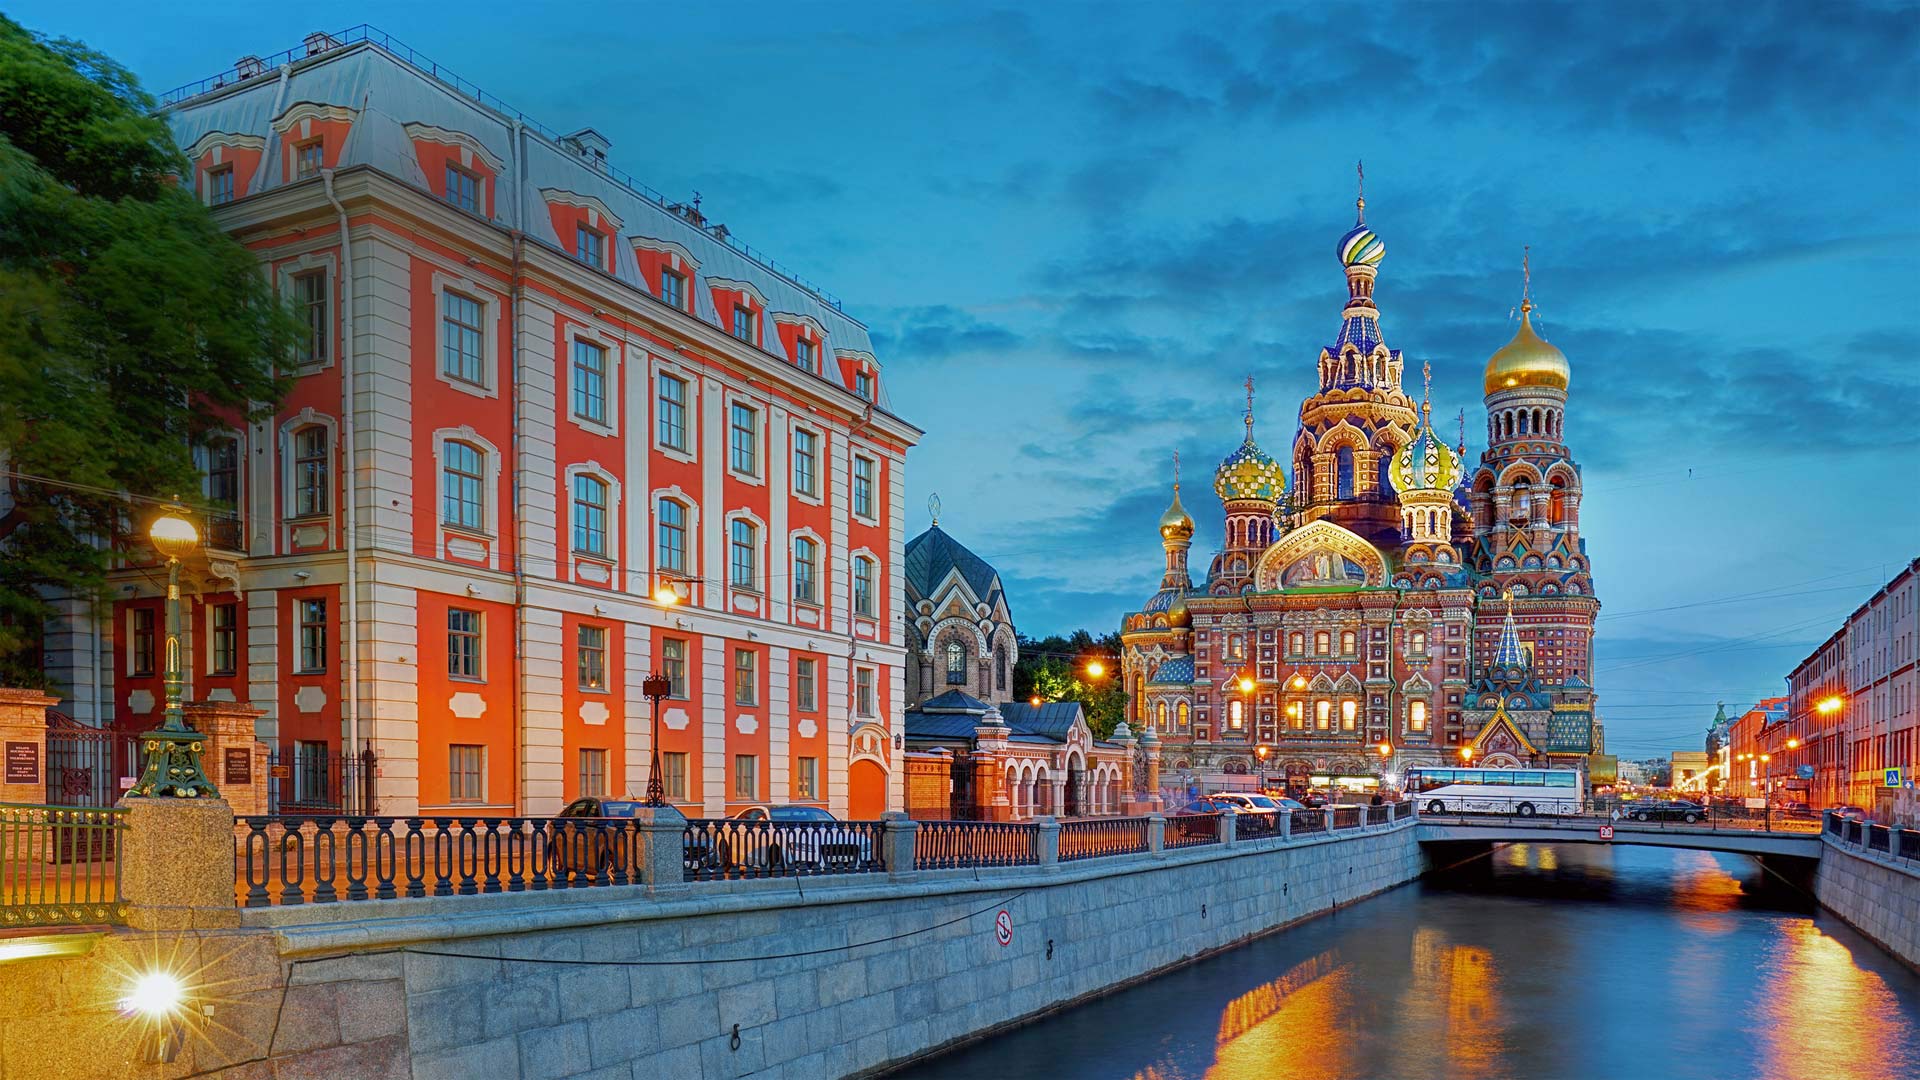 Griboyedov Canal and the Church of the Savior on Spilled Blood in Saint Petersburg, Russia - Tomas Sereda/Getty Images)